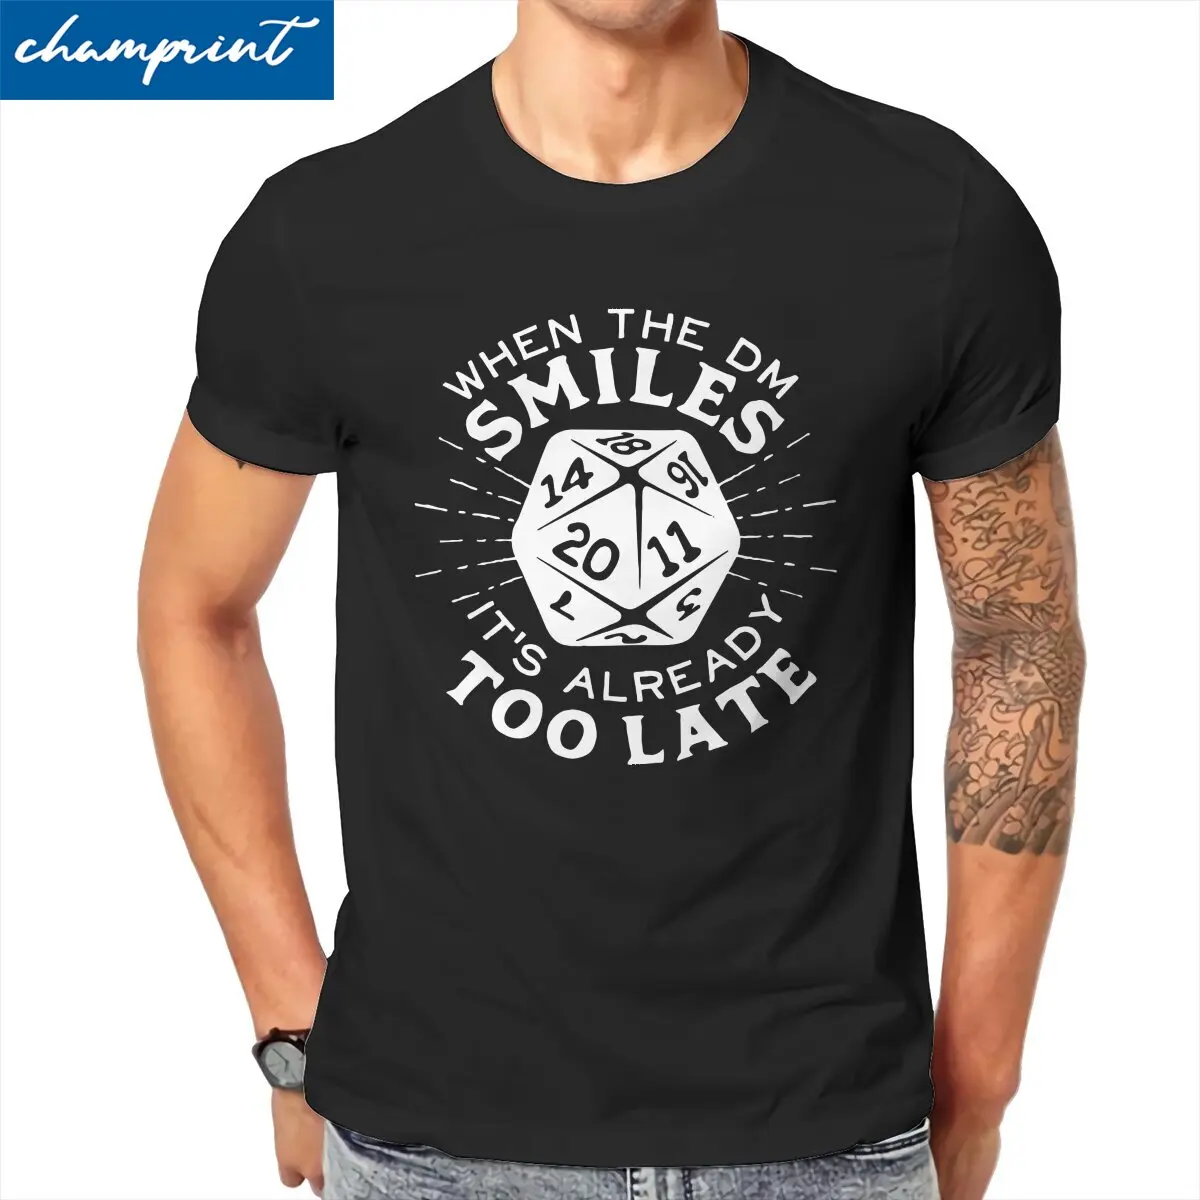 Funny When The DM Smiles It's Already Too Late DnD T-Shirt Men 100% Cotton T Shirts Short Sleeve Tees New Arrival Clothes